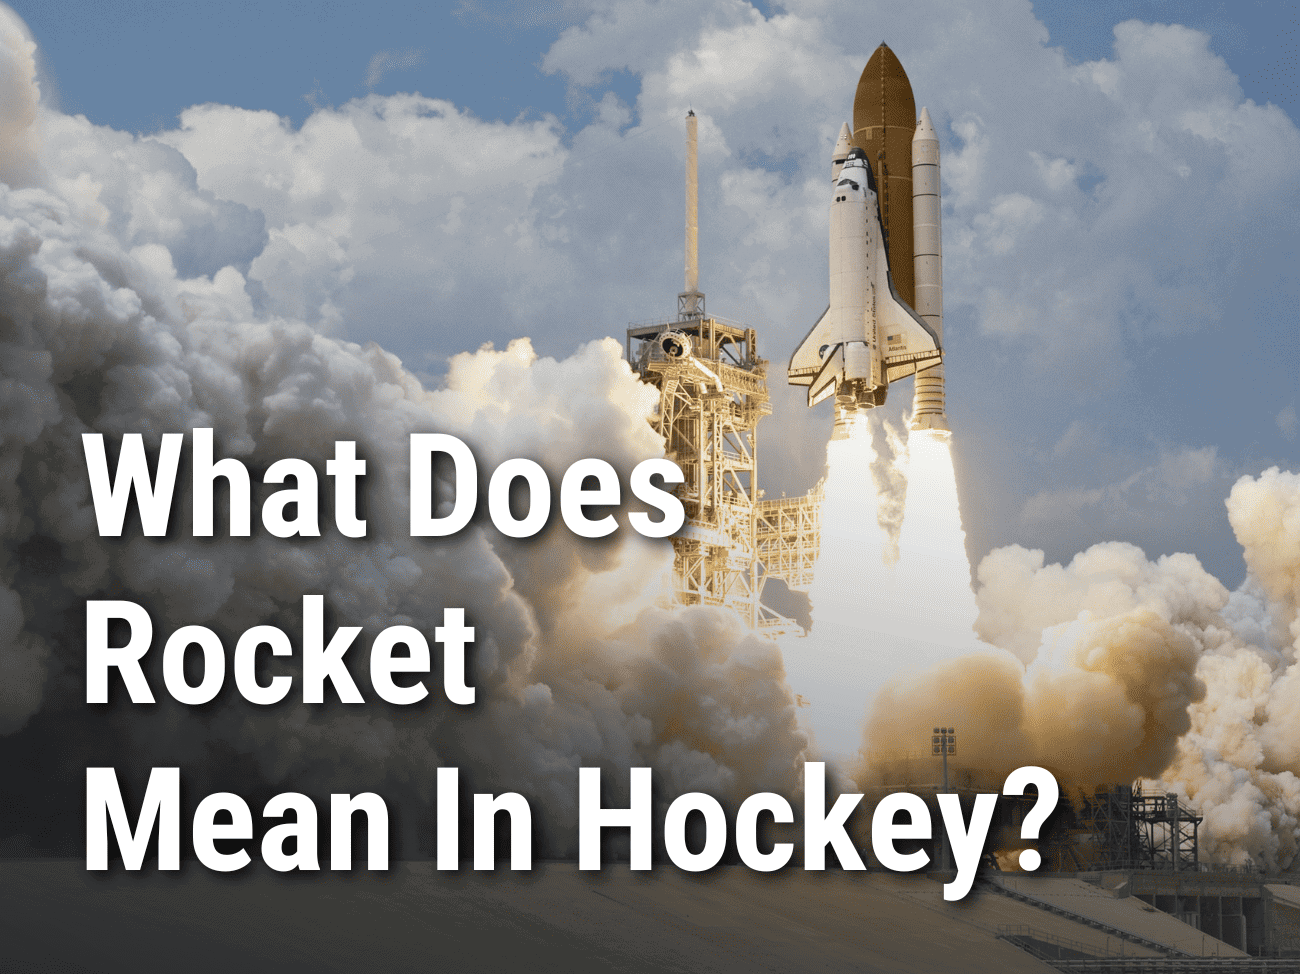 What Does Rocket Mean In Hockey?